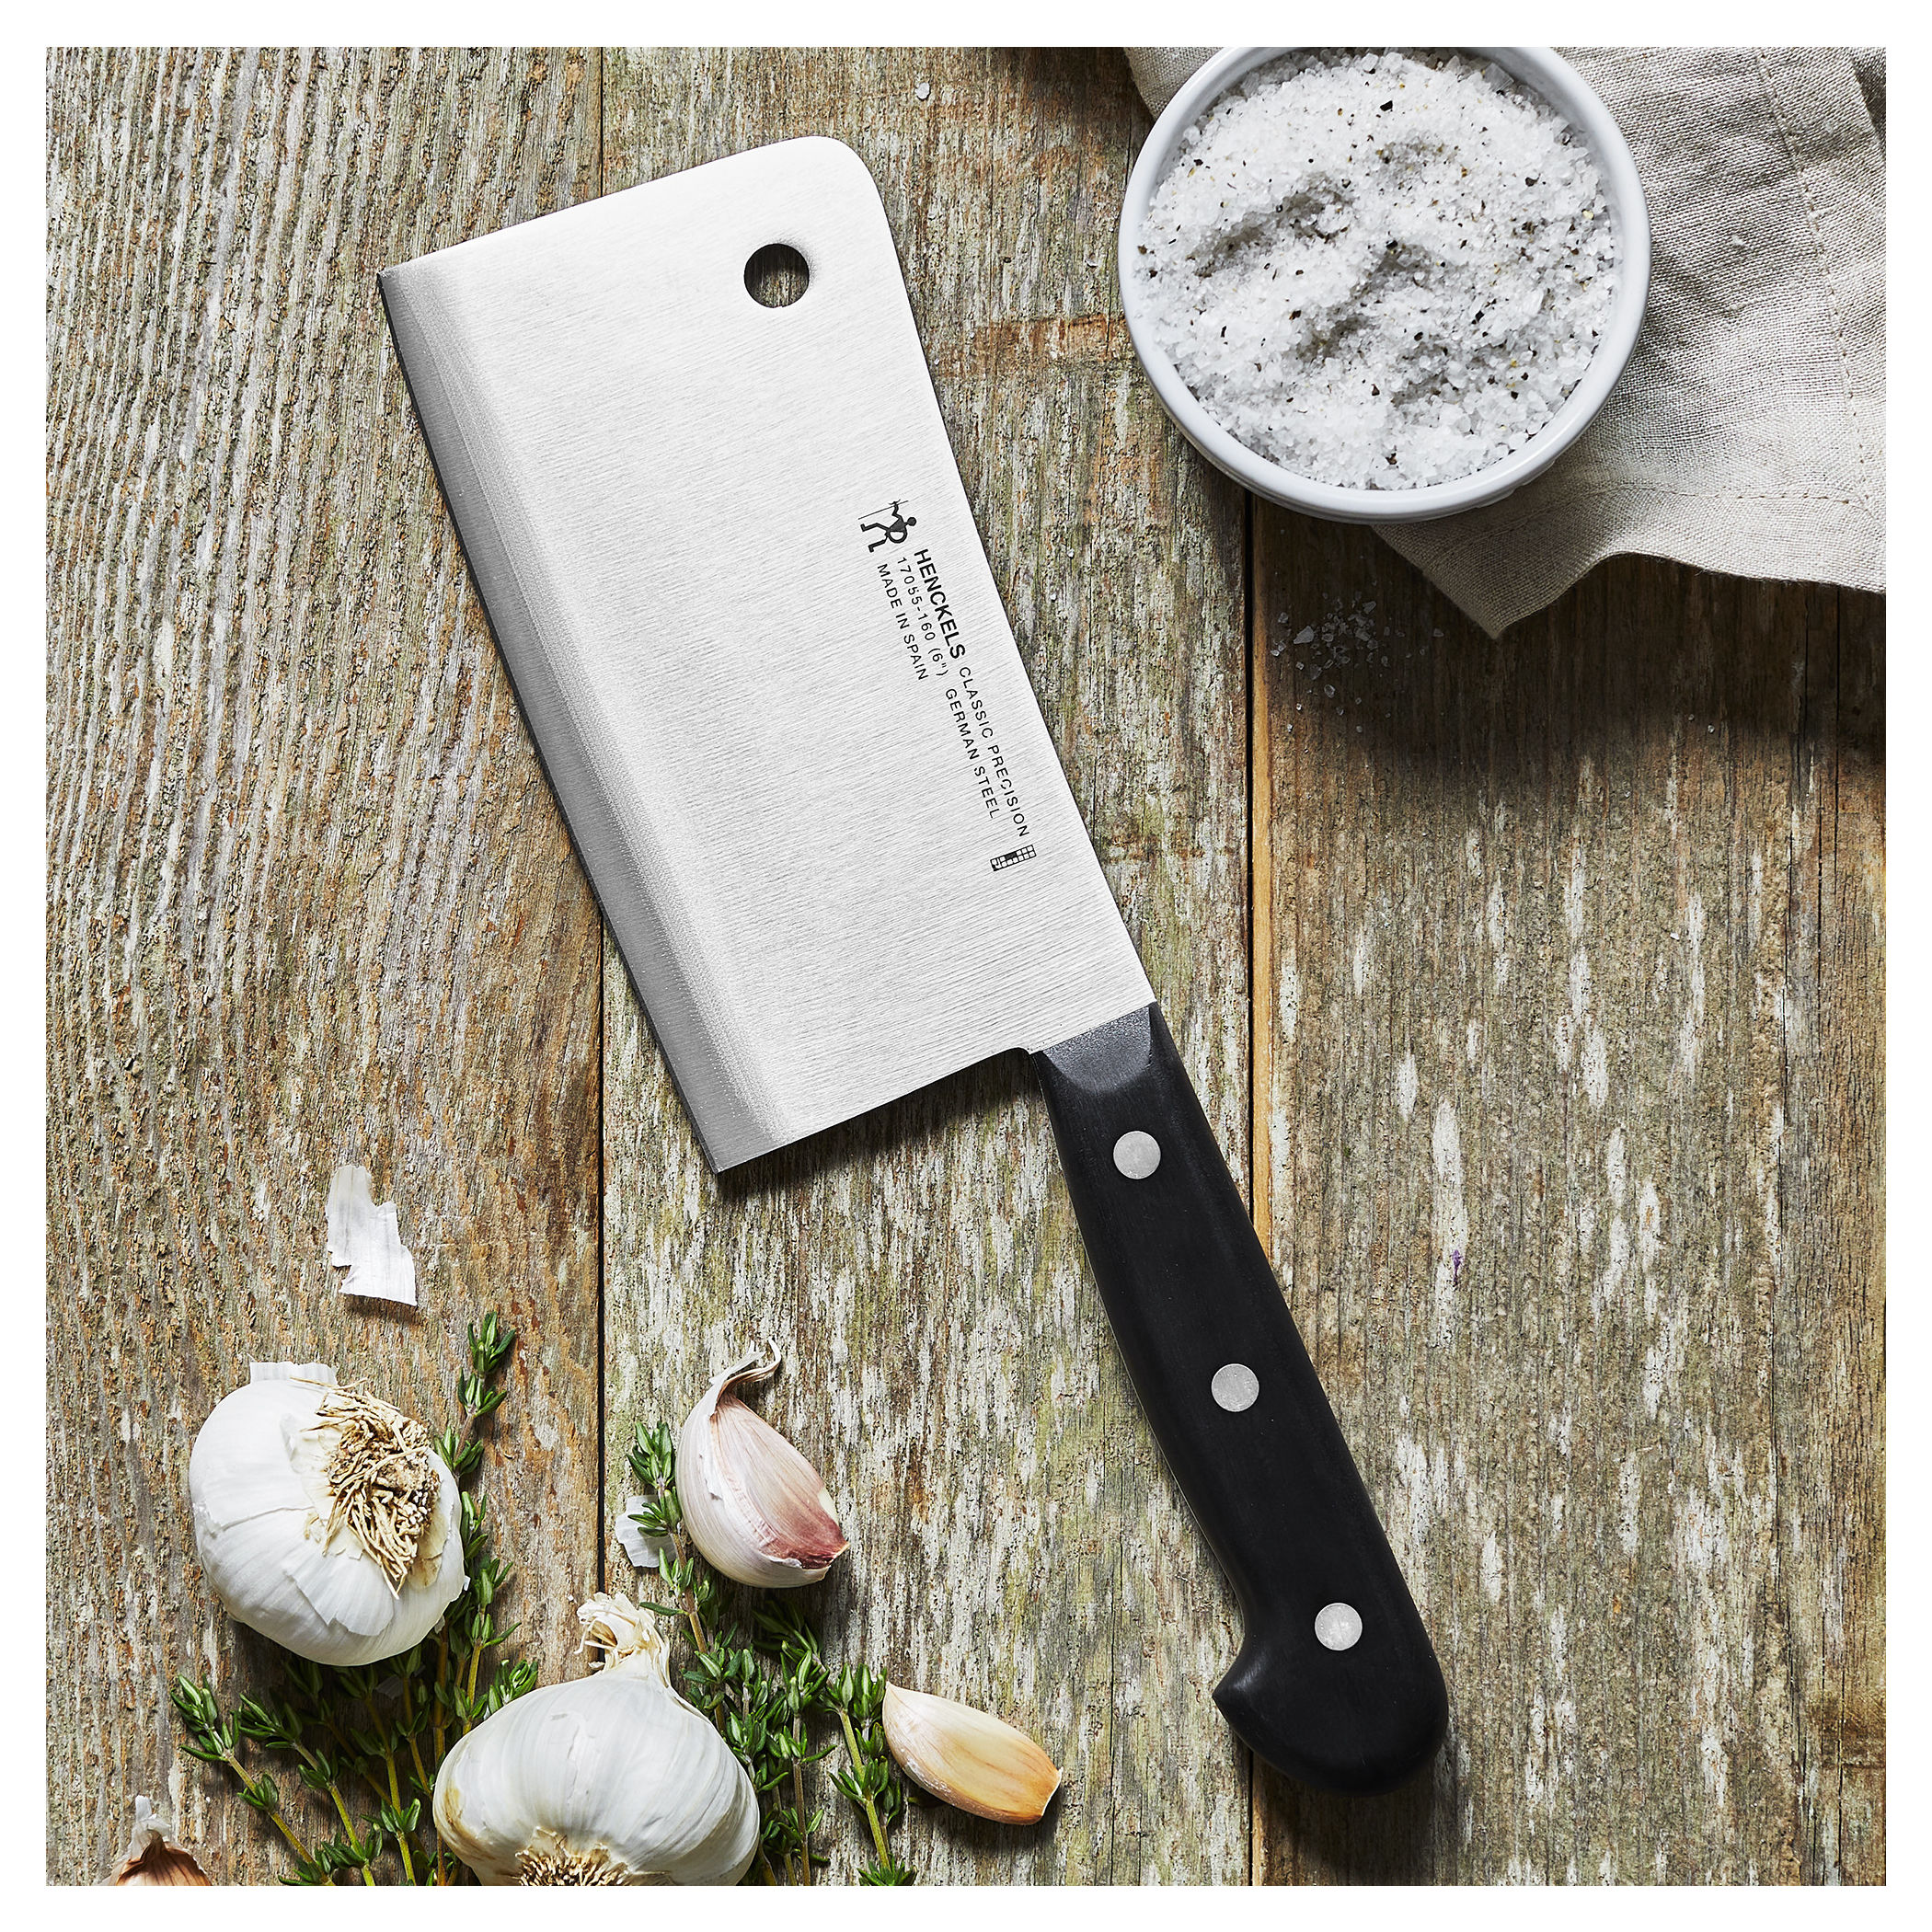 Henckels Forged Premio 6-inch Meat Cleaver & Reviews